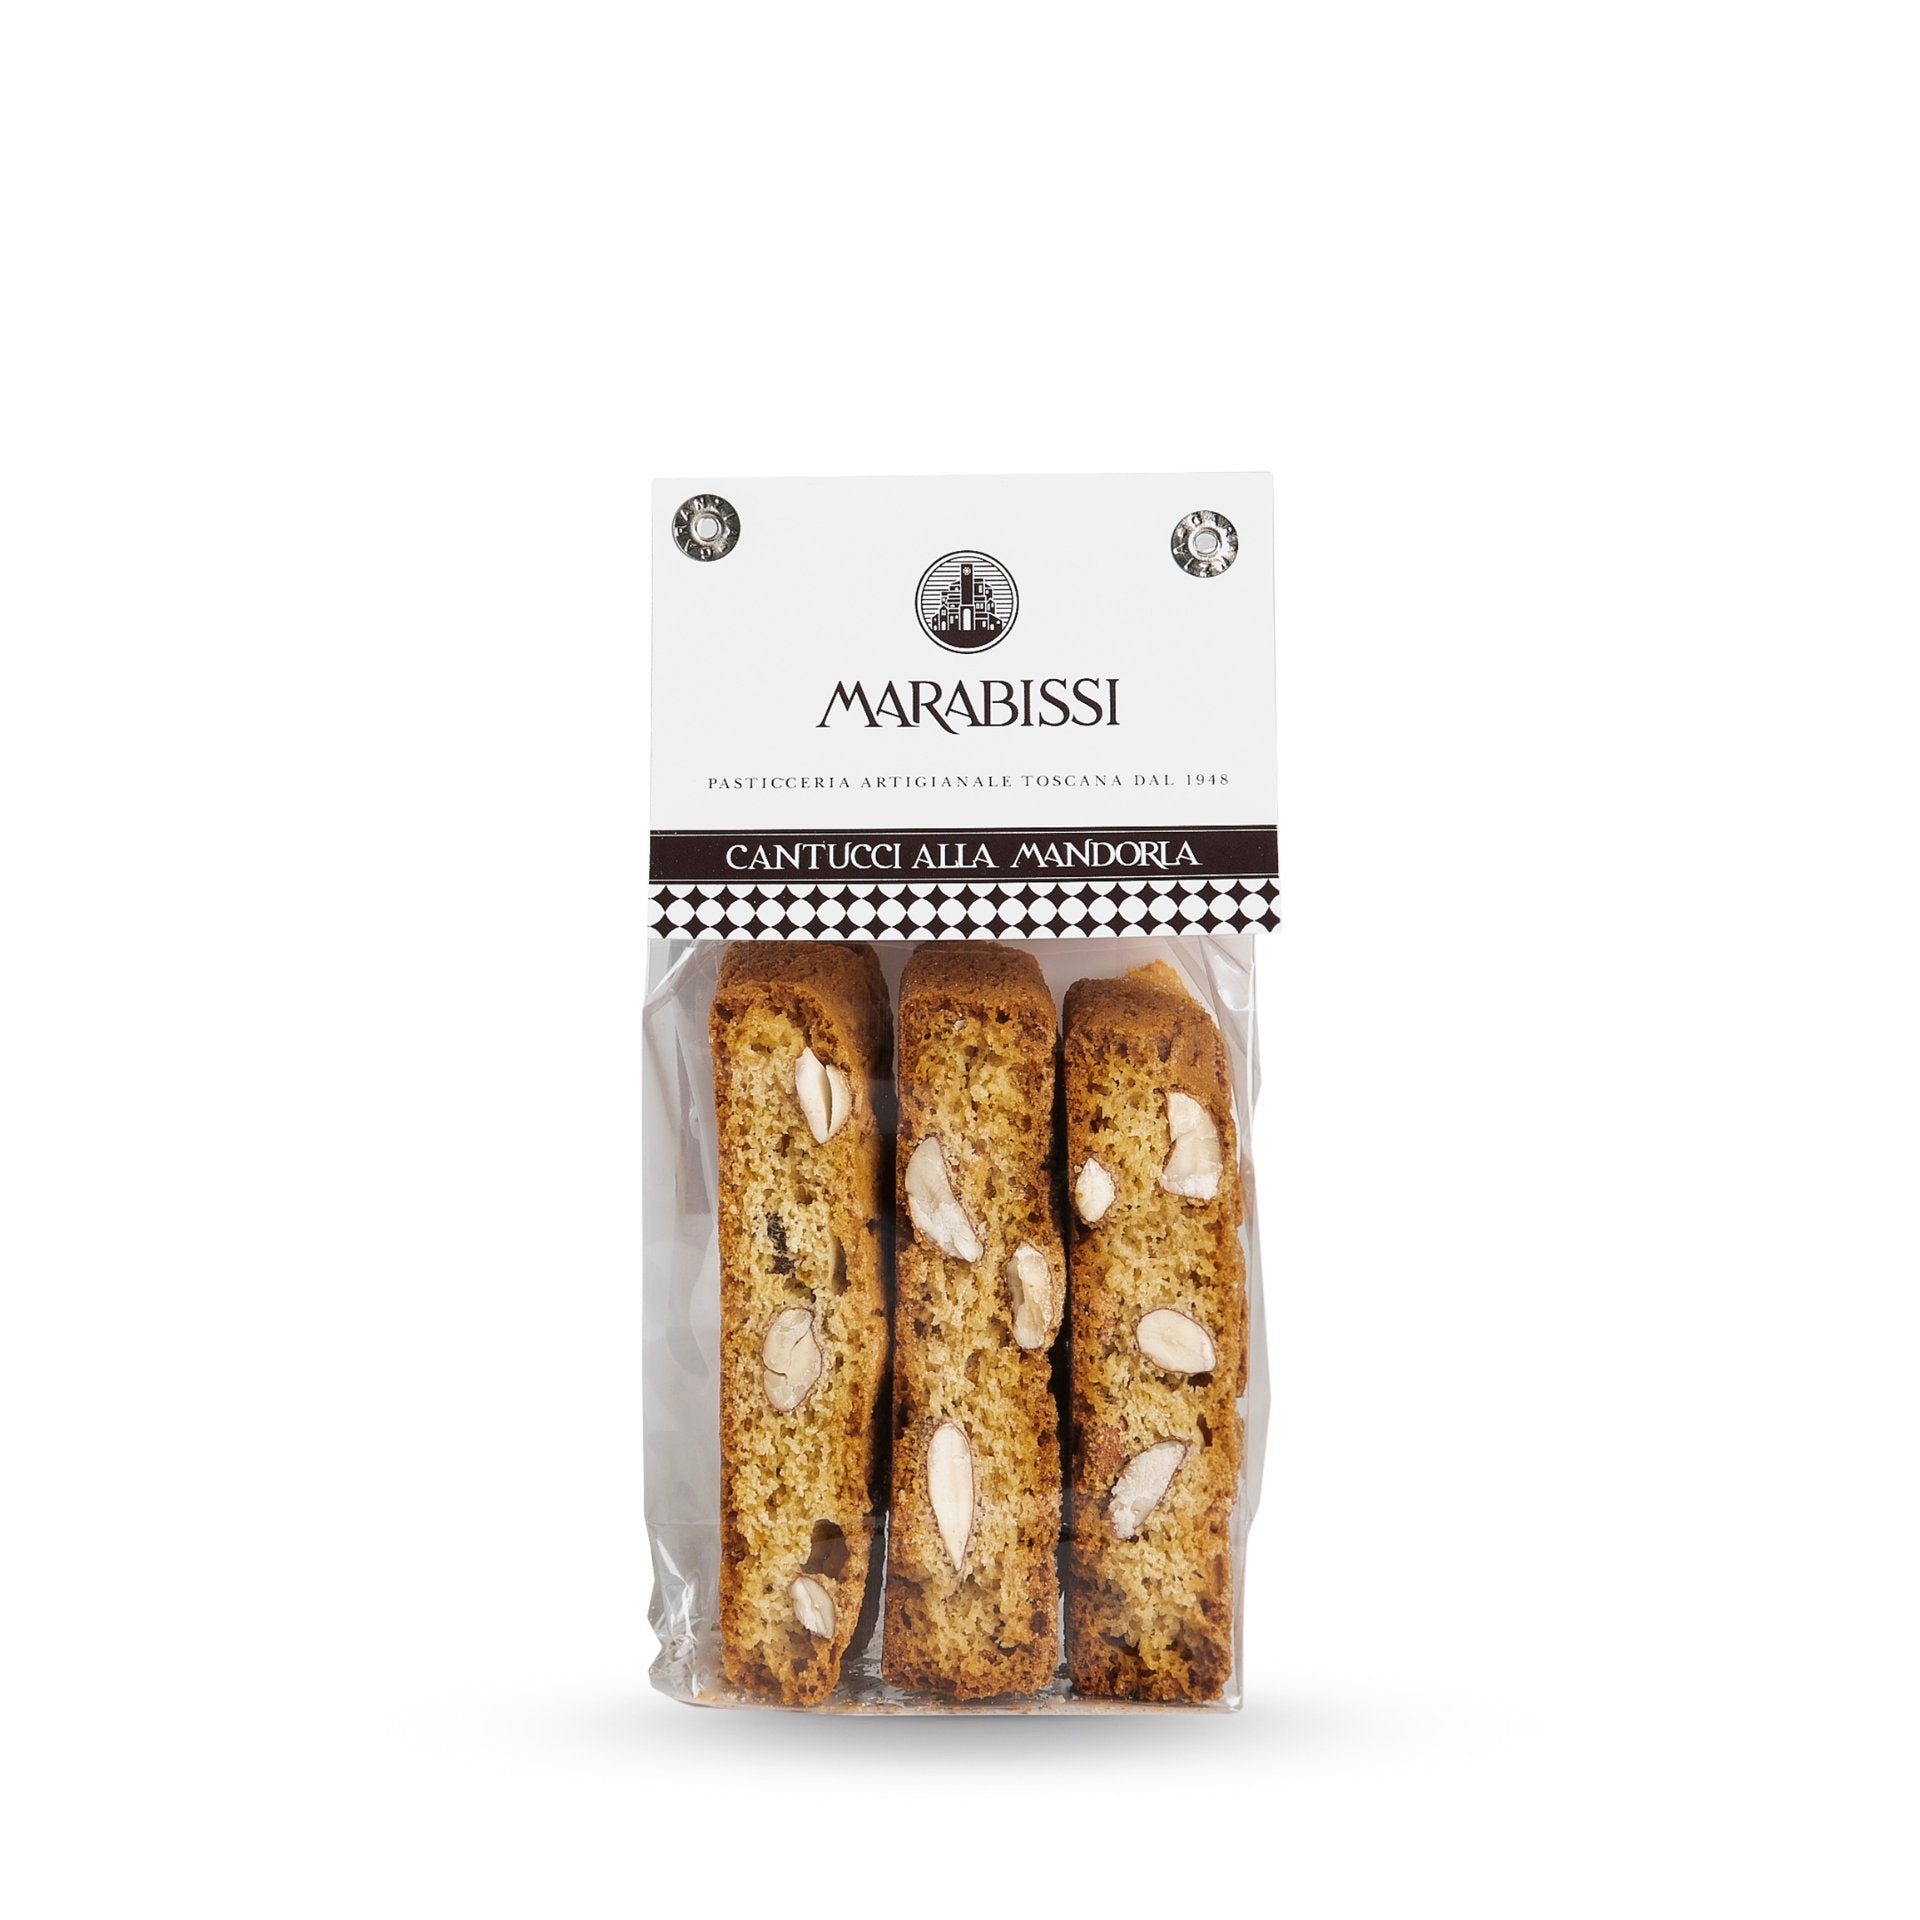 Marabissi Almond Cantucci (Bag) 120g  | Imported and distributed in the UK by Just Gourmet Foods